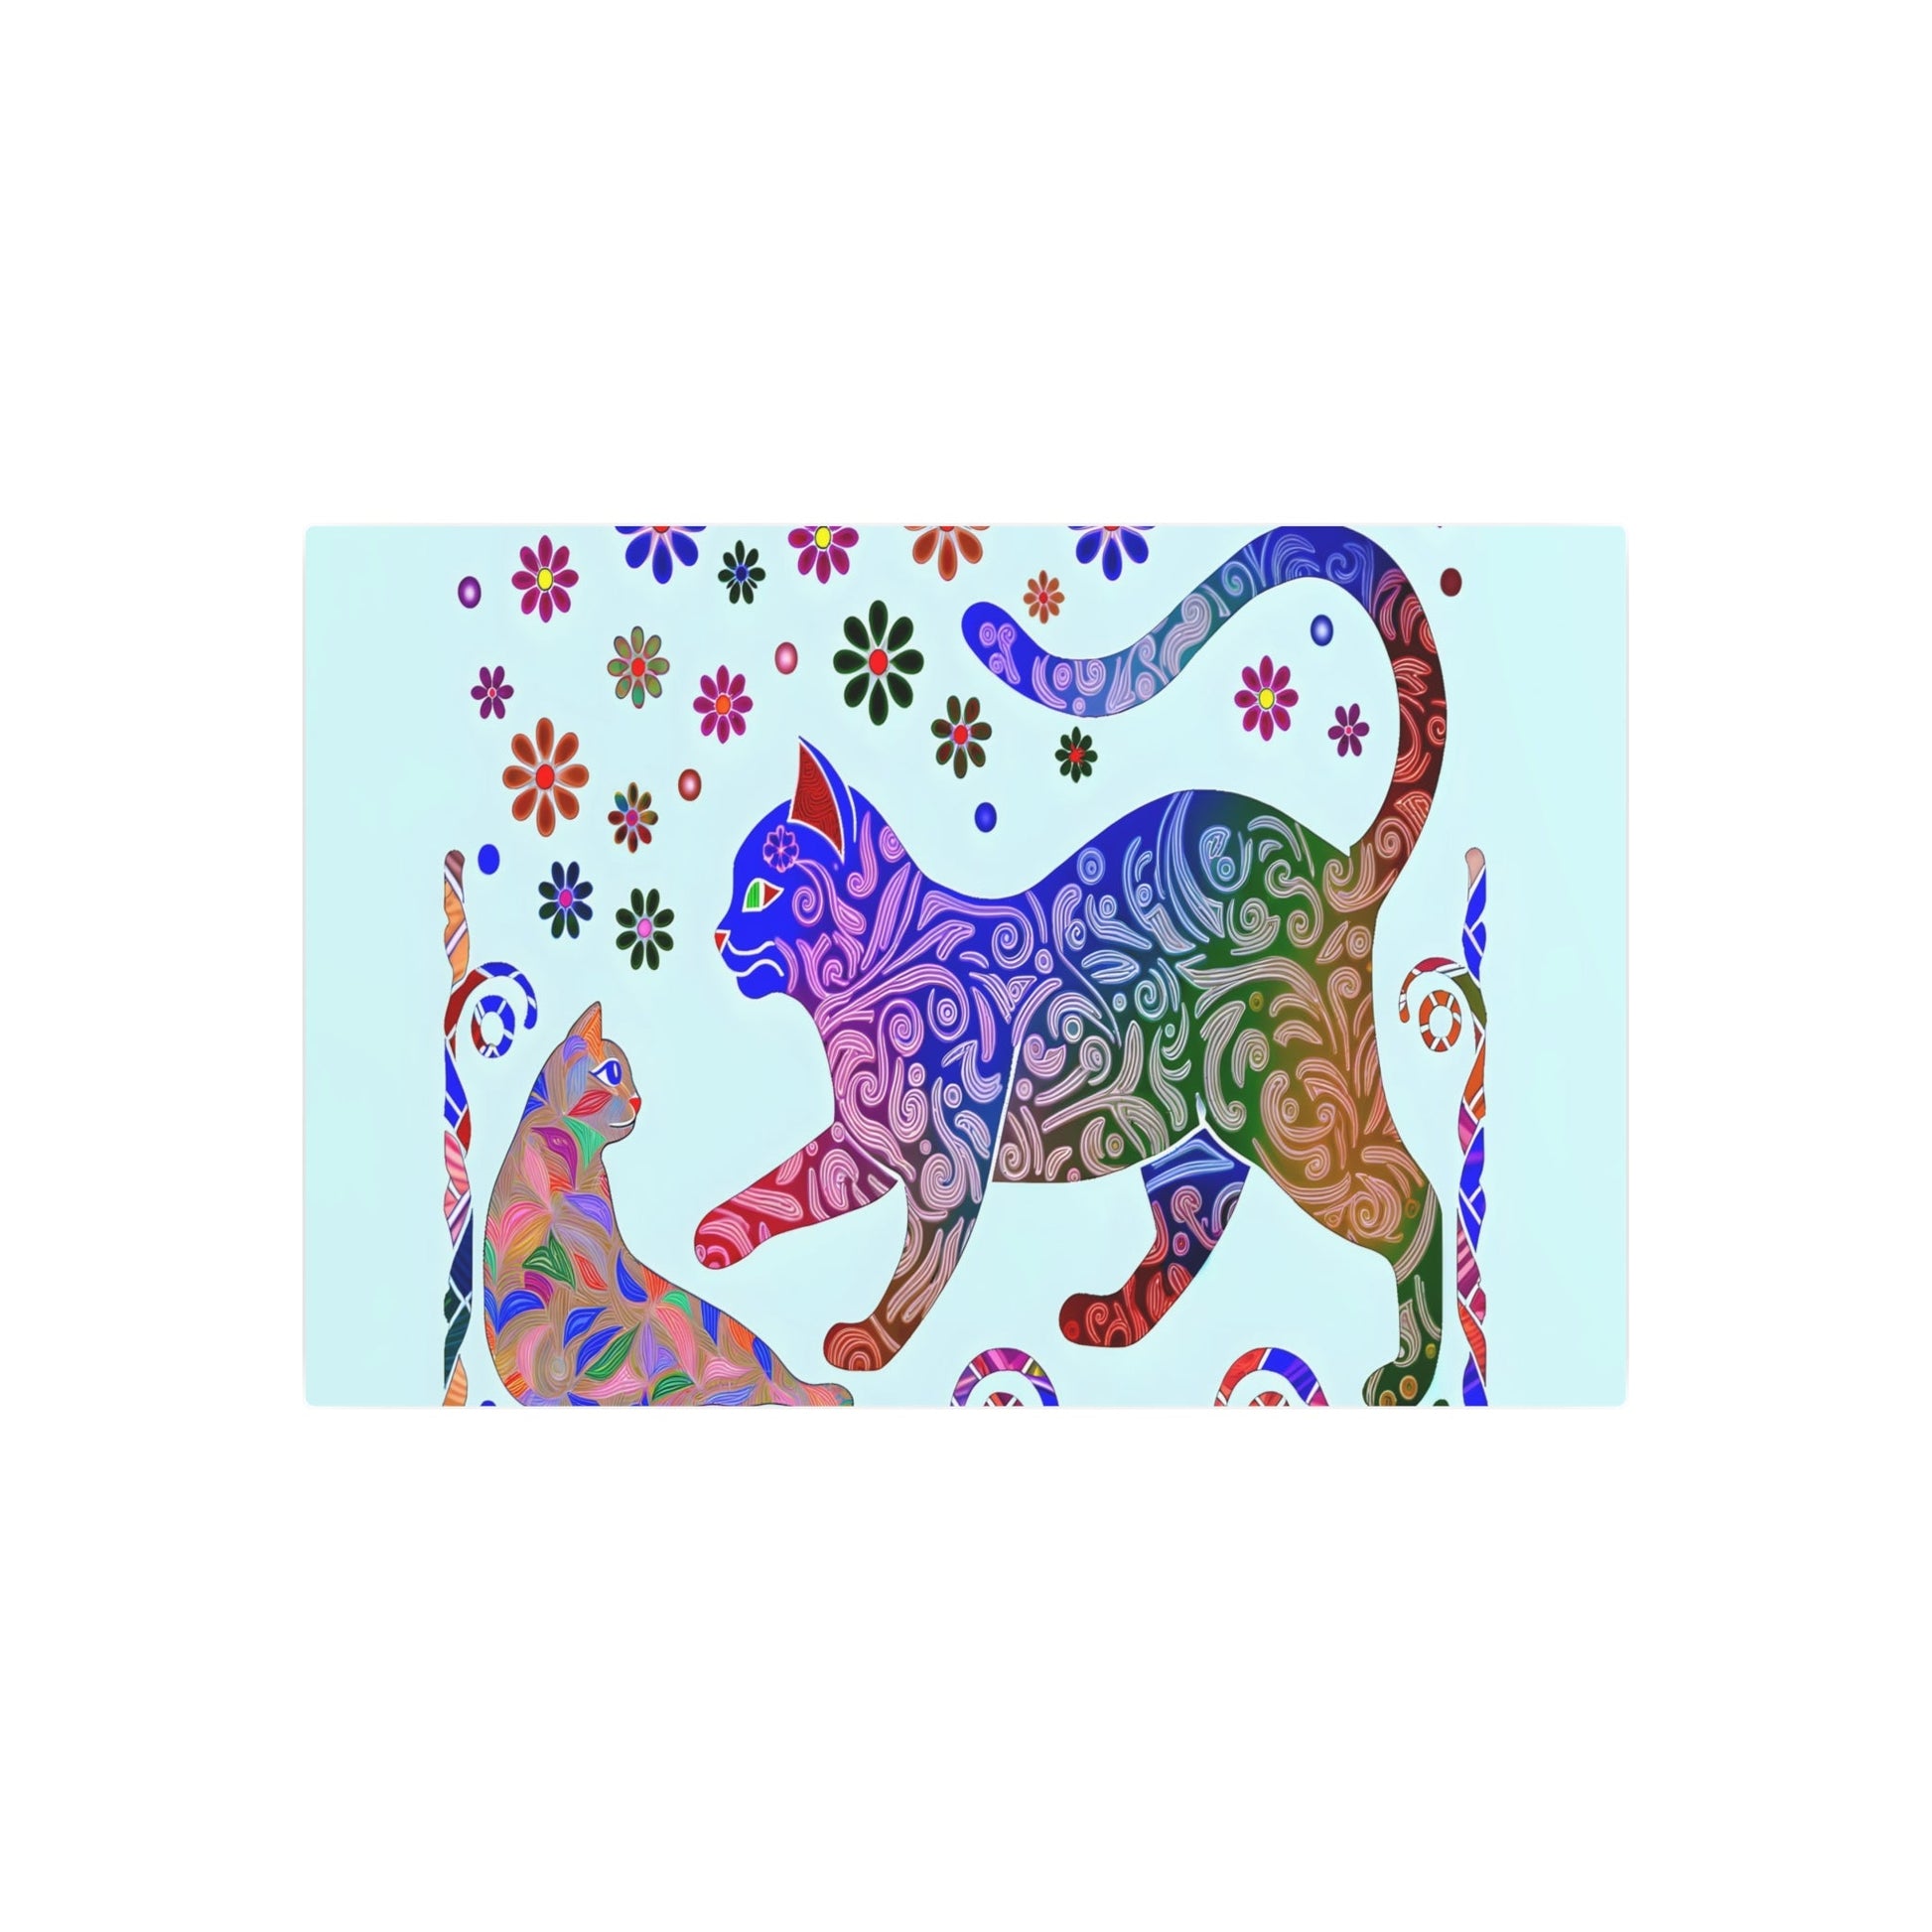 Metal Poster Art | "Indonesian Batik-Style Artwork with Vibrant Colors and Intricate Patterns Featuring Playful Cat - Non-Western & Global Styles Art - Metal Poster Art 36″ x 24″ (Horizontal) 0.12''